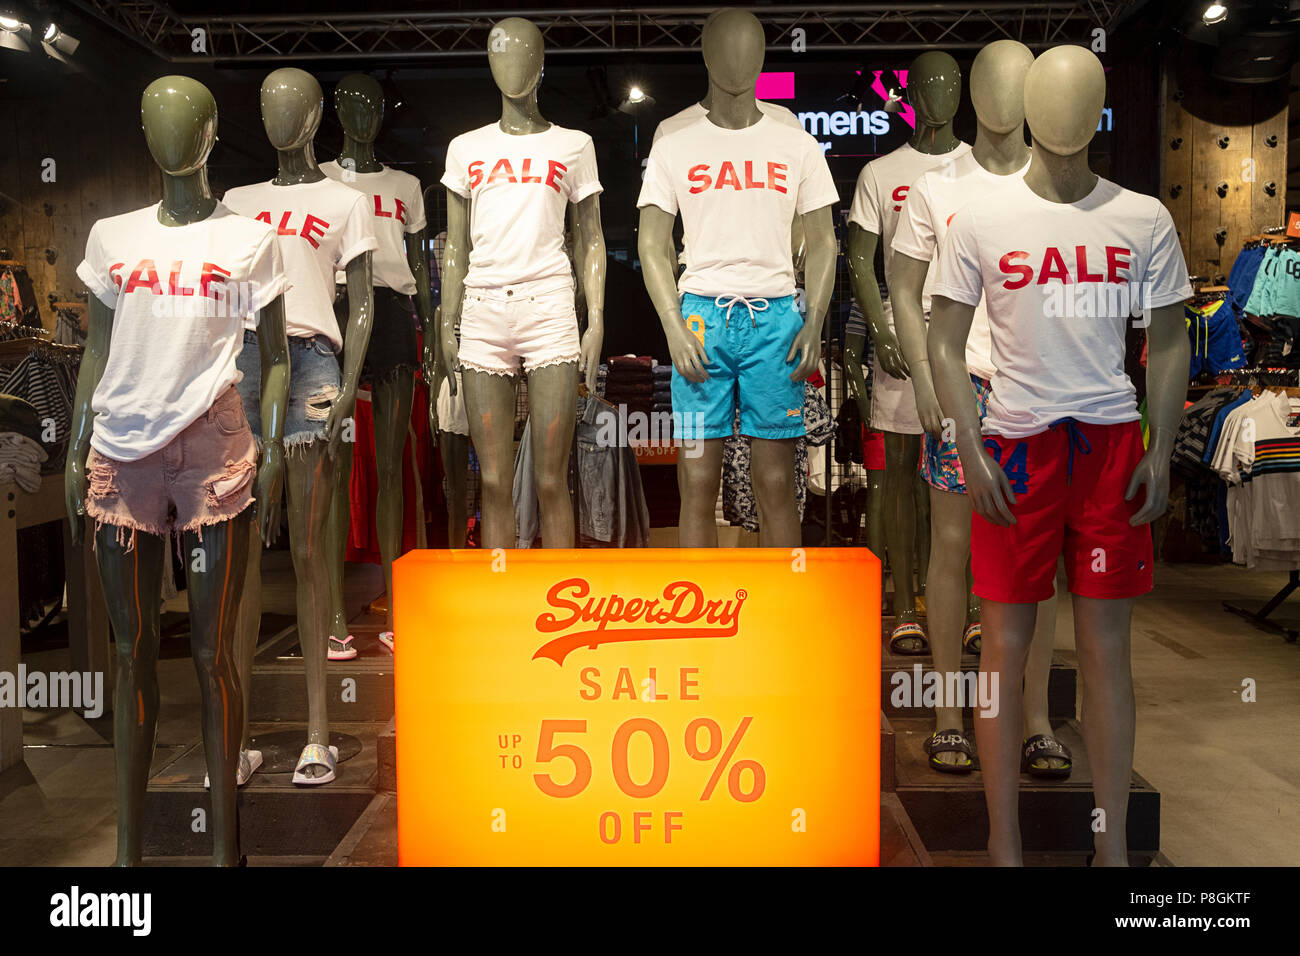 Mannequins wearing SALE tee shirts in the Super Dry store on West 34th St. in Manhattan, New York City. Stock Photo